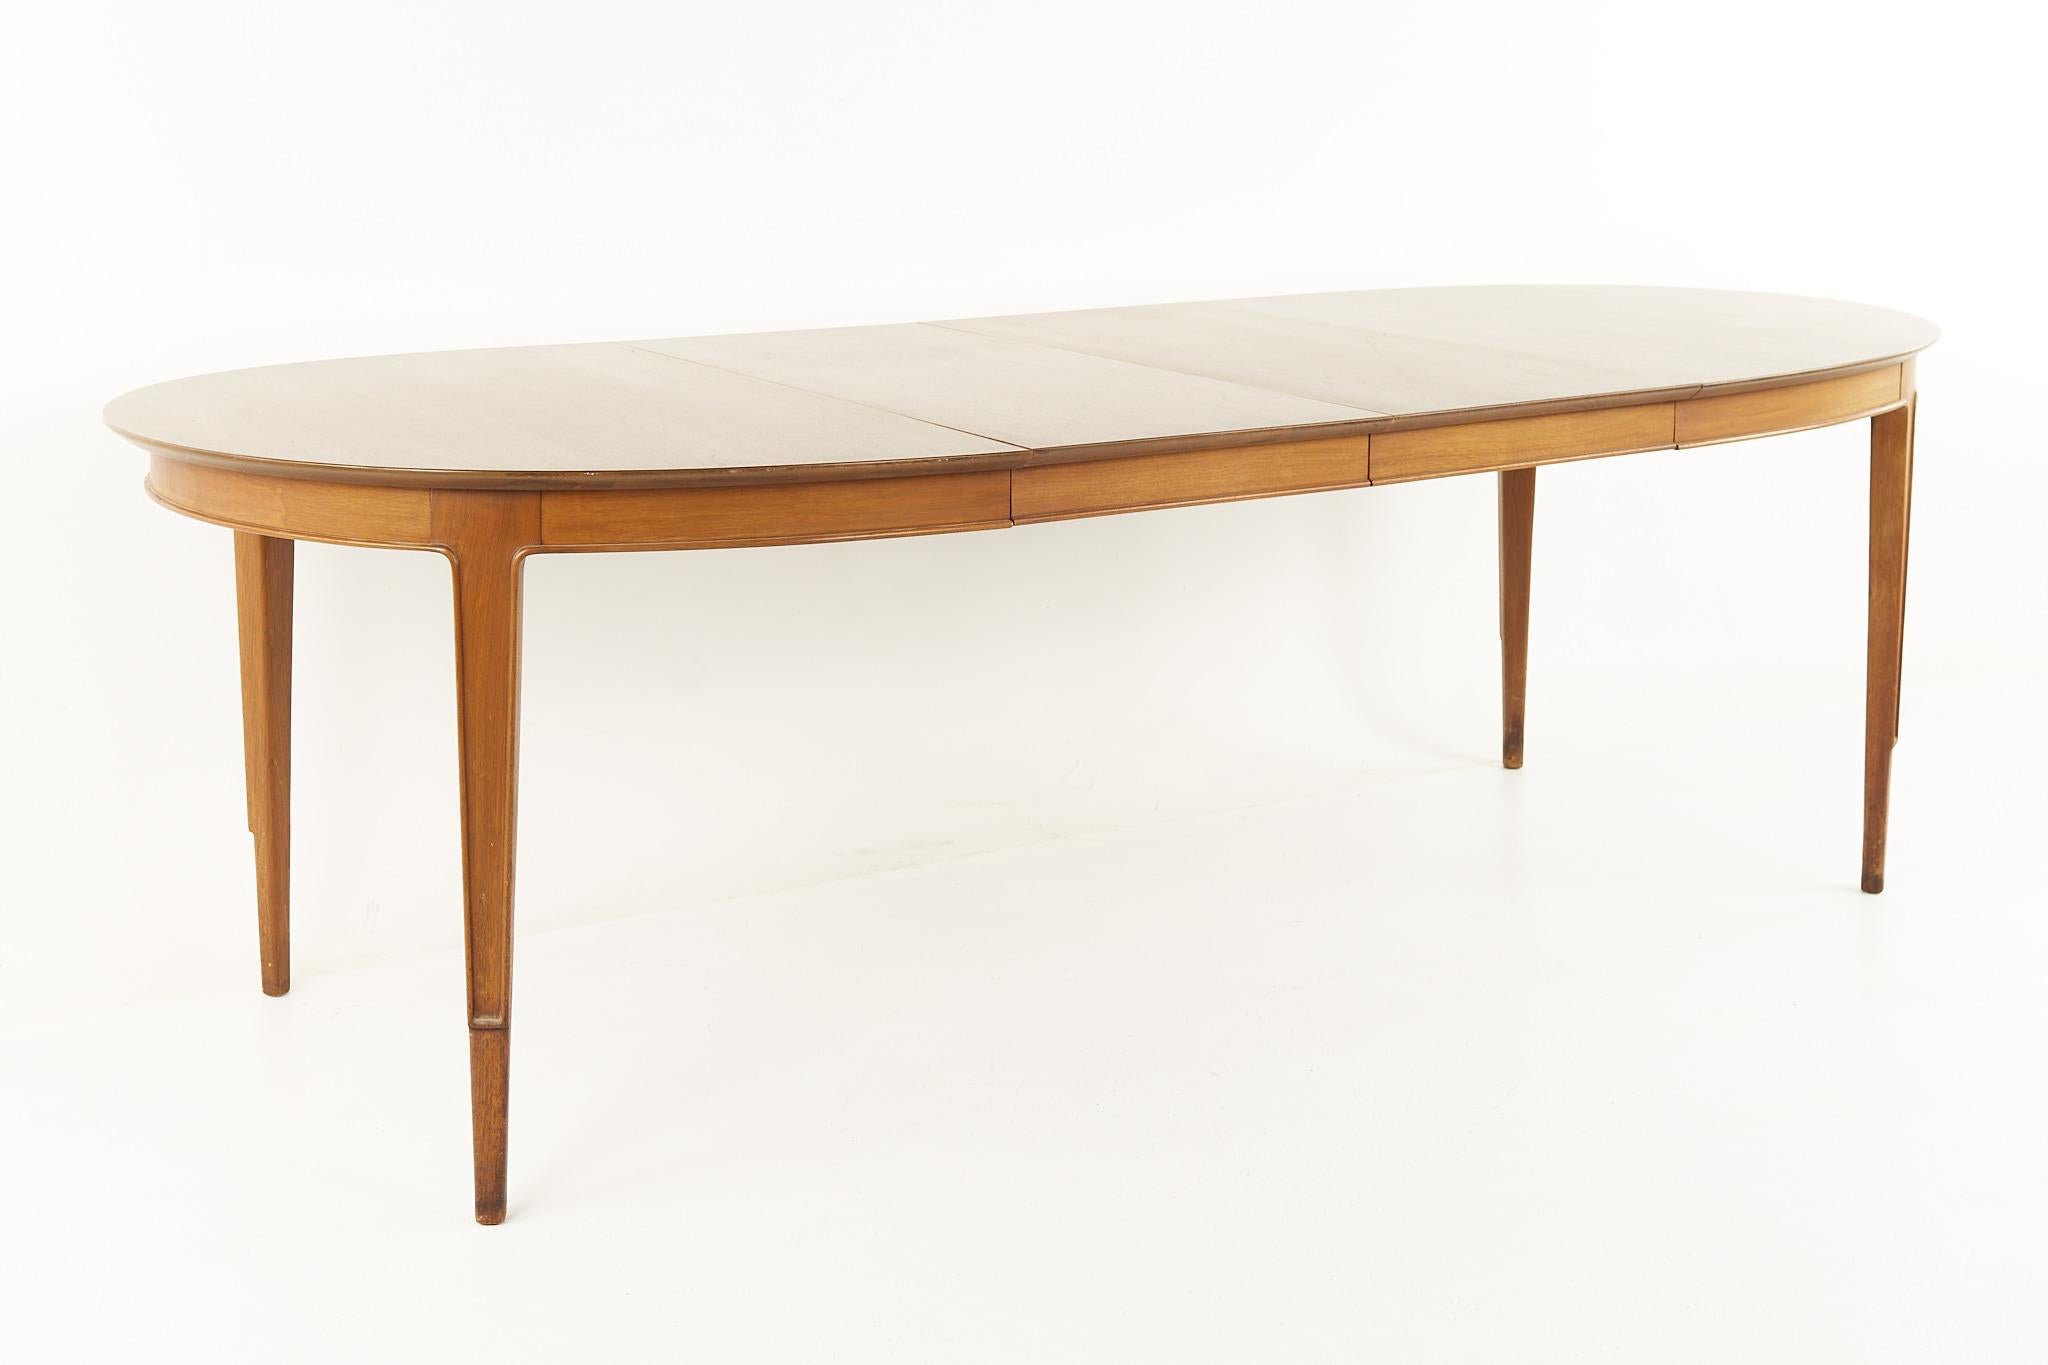 Mount Airy Janus Mid Century Dining Table with 2 Leaves 4